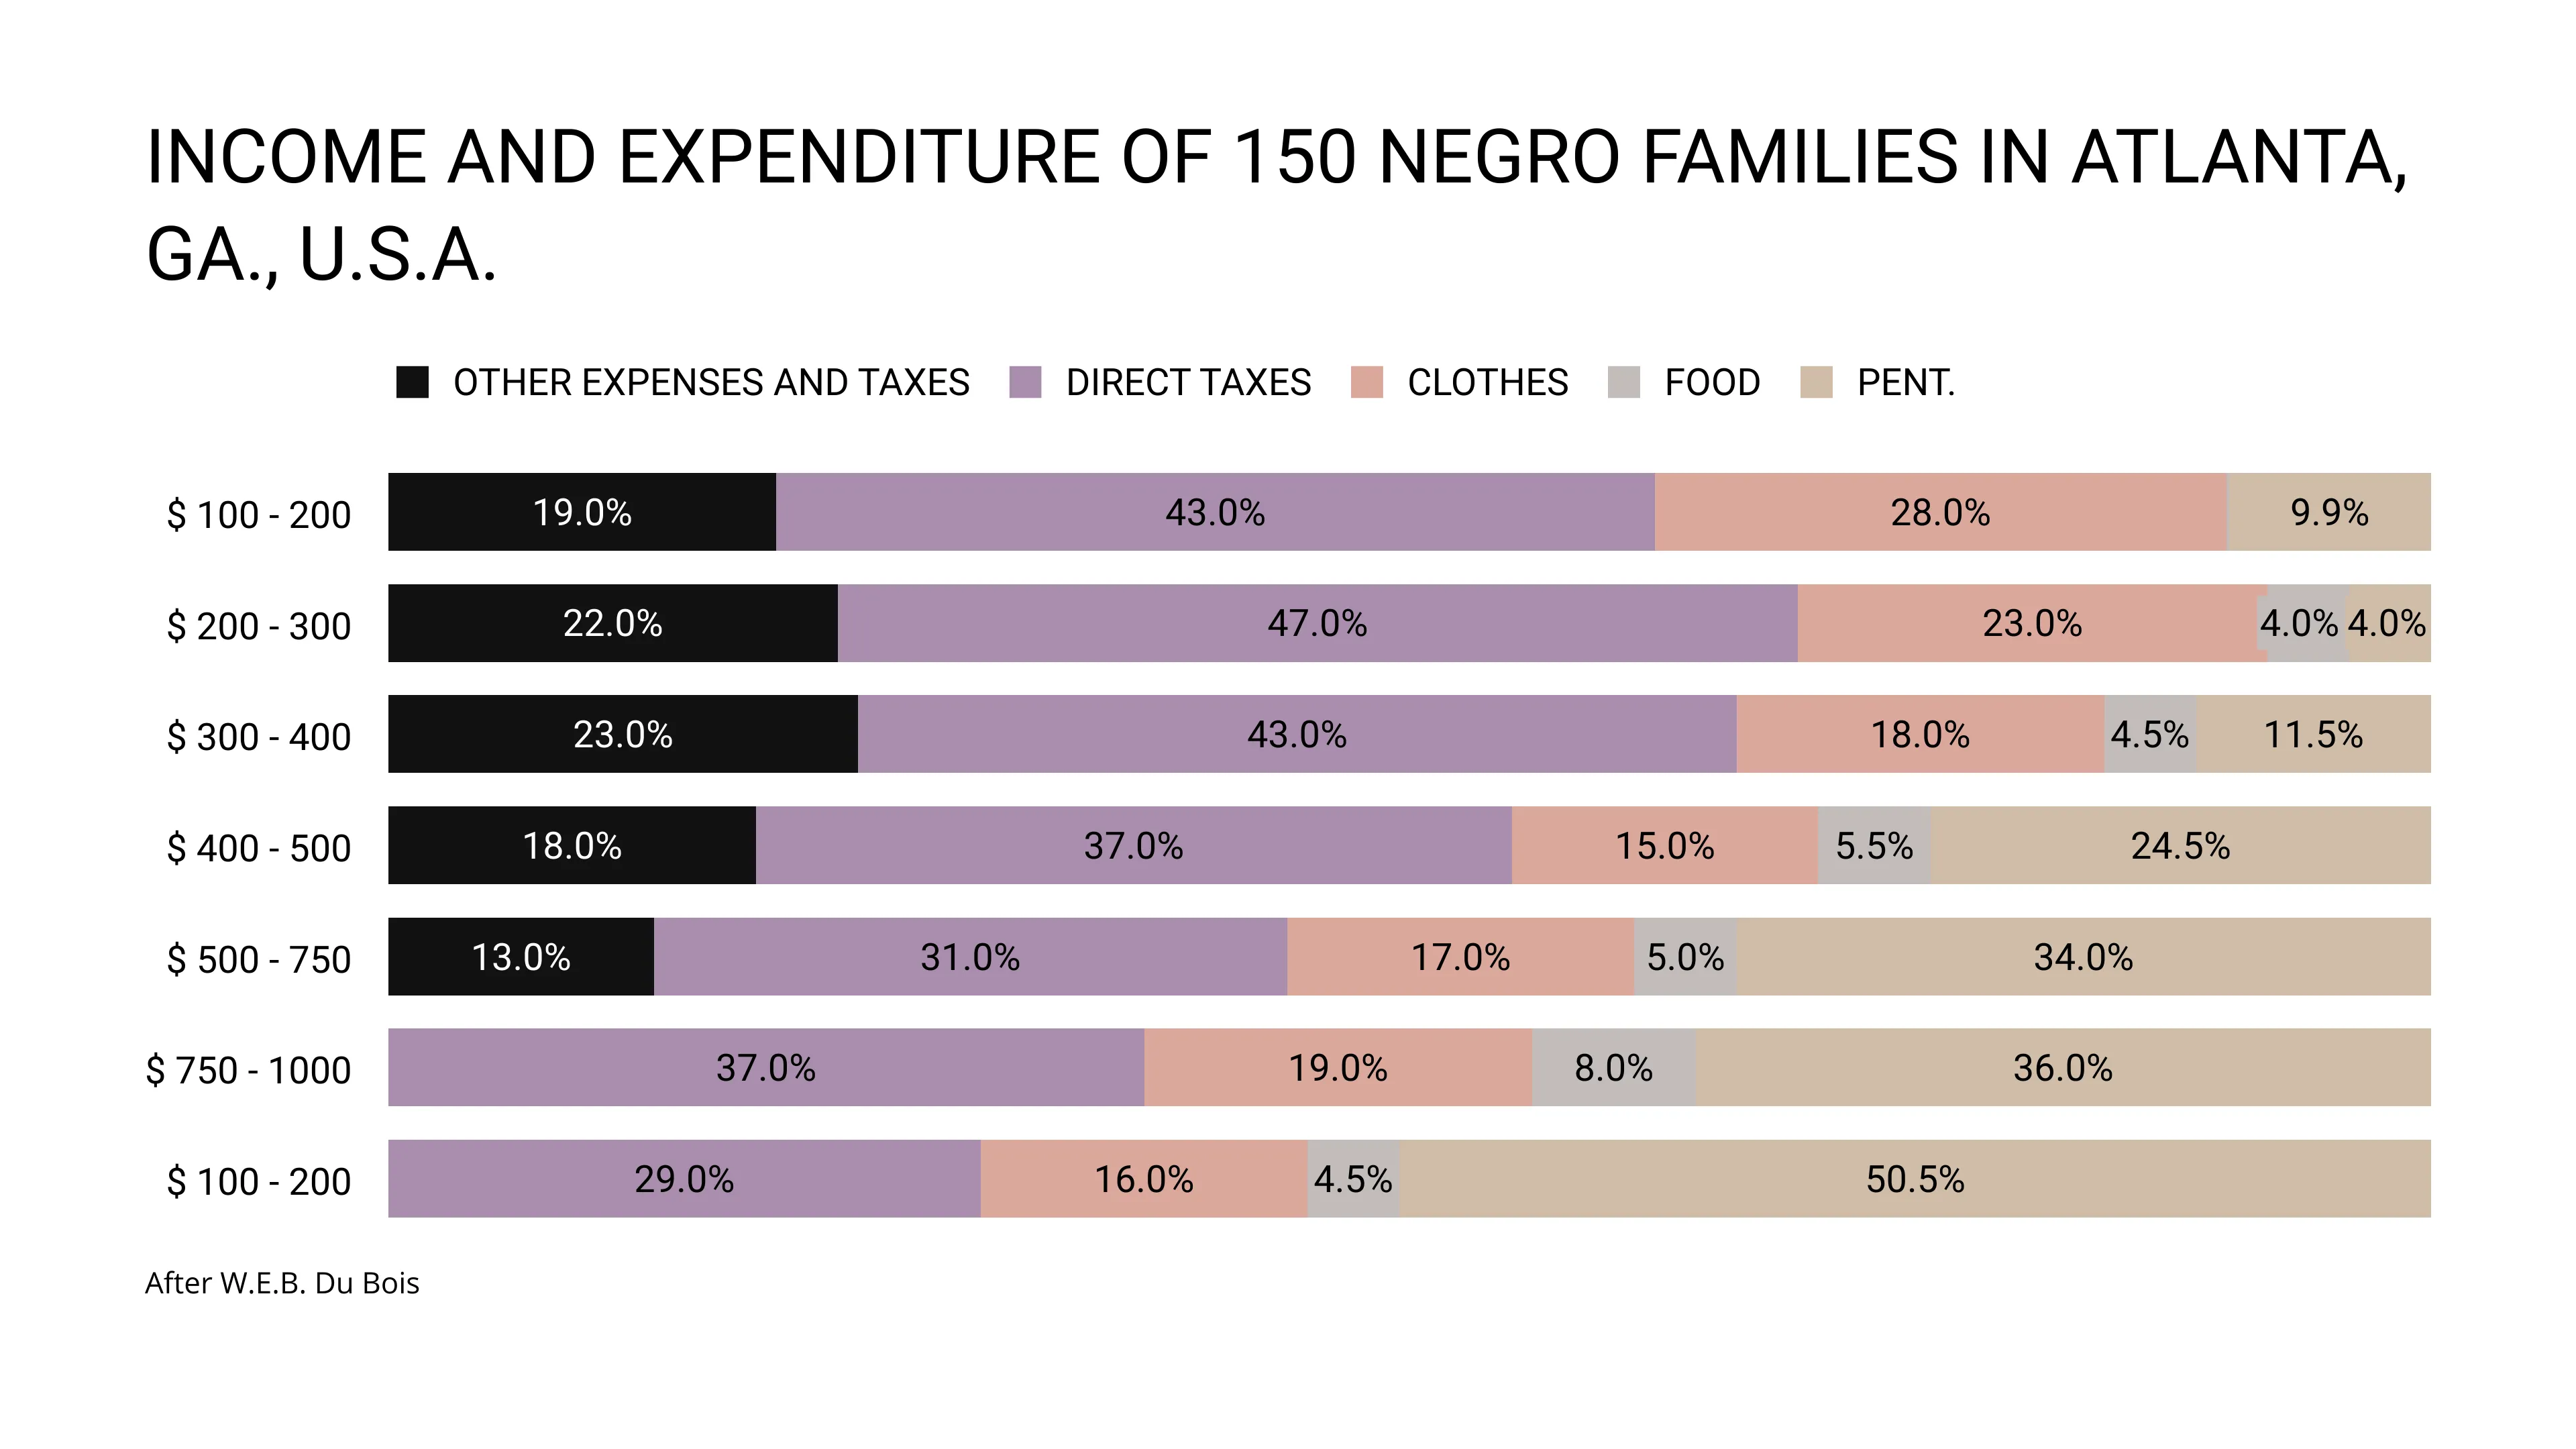 INCOME AND EXPENDITURE OF 150 NEGRO FAMILIES IN ATLANTA, GA., U.S.A